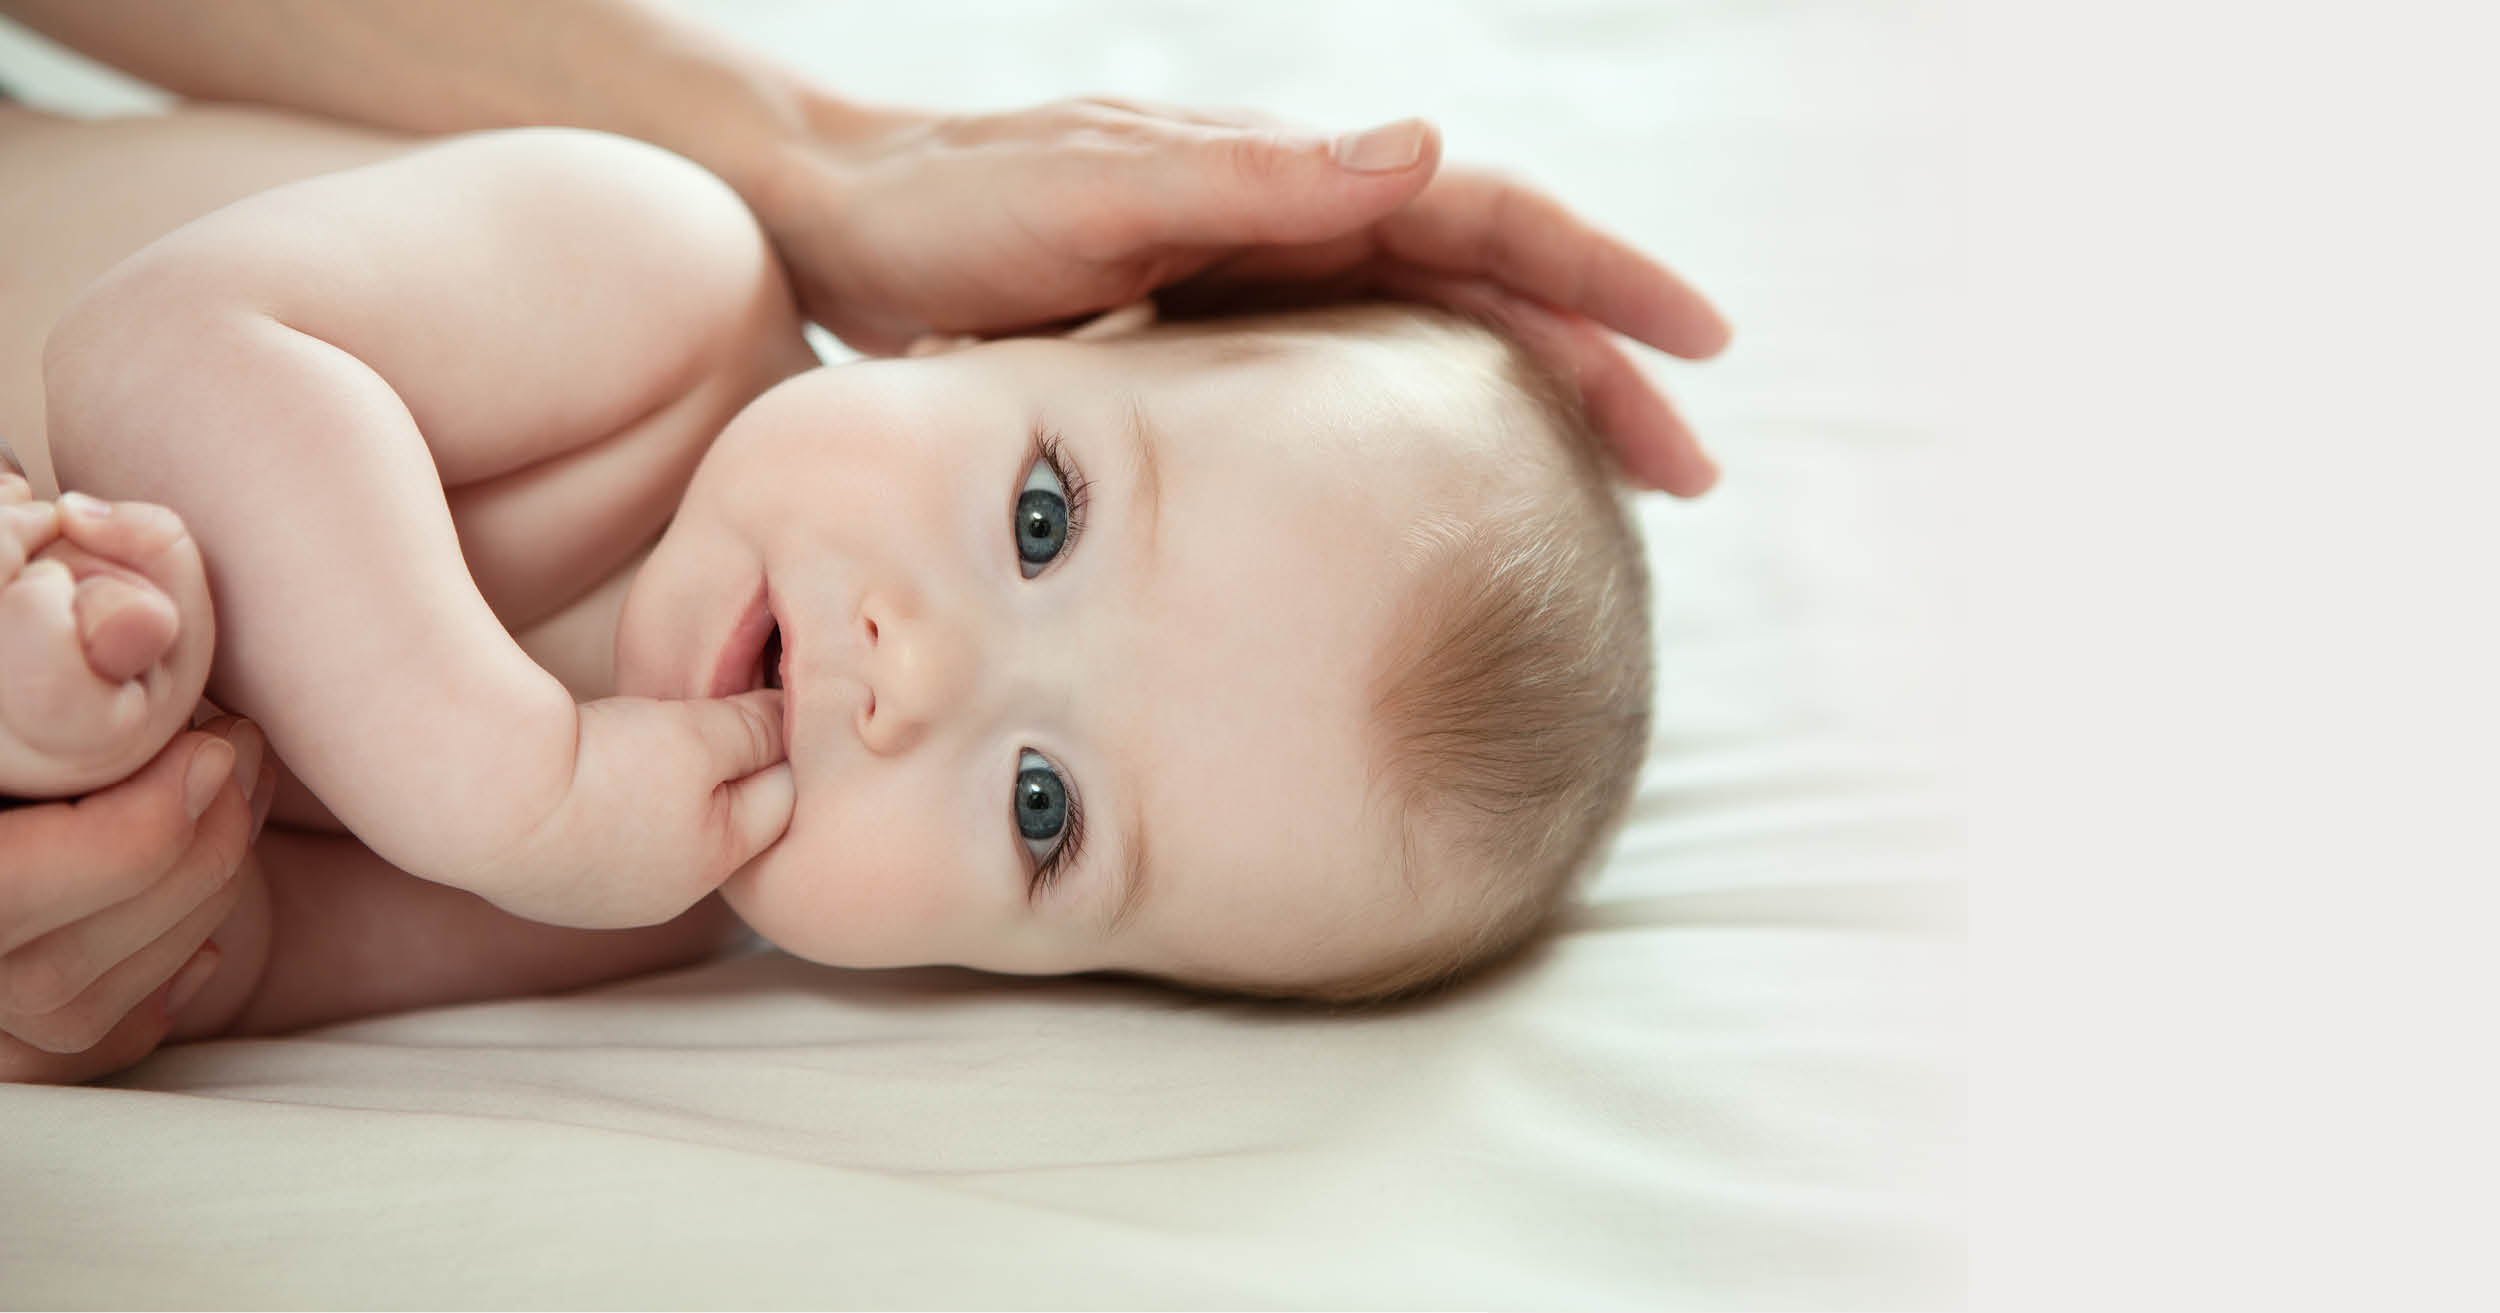 2. "Blonde Hair Newborn Baby" - Tips for Caring for Your Baby's Hair - wide 4